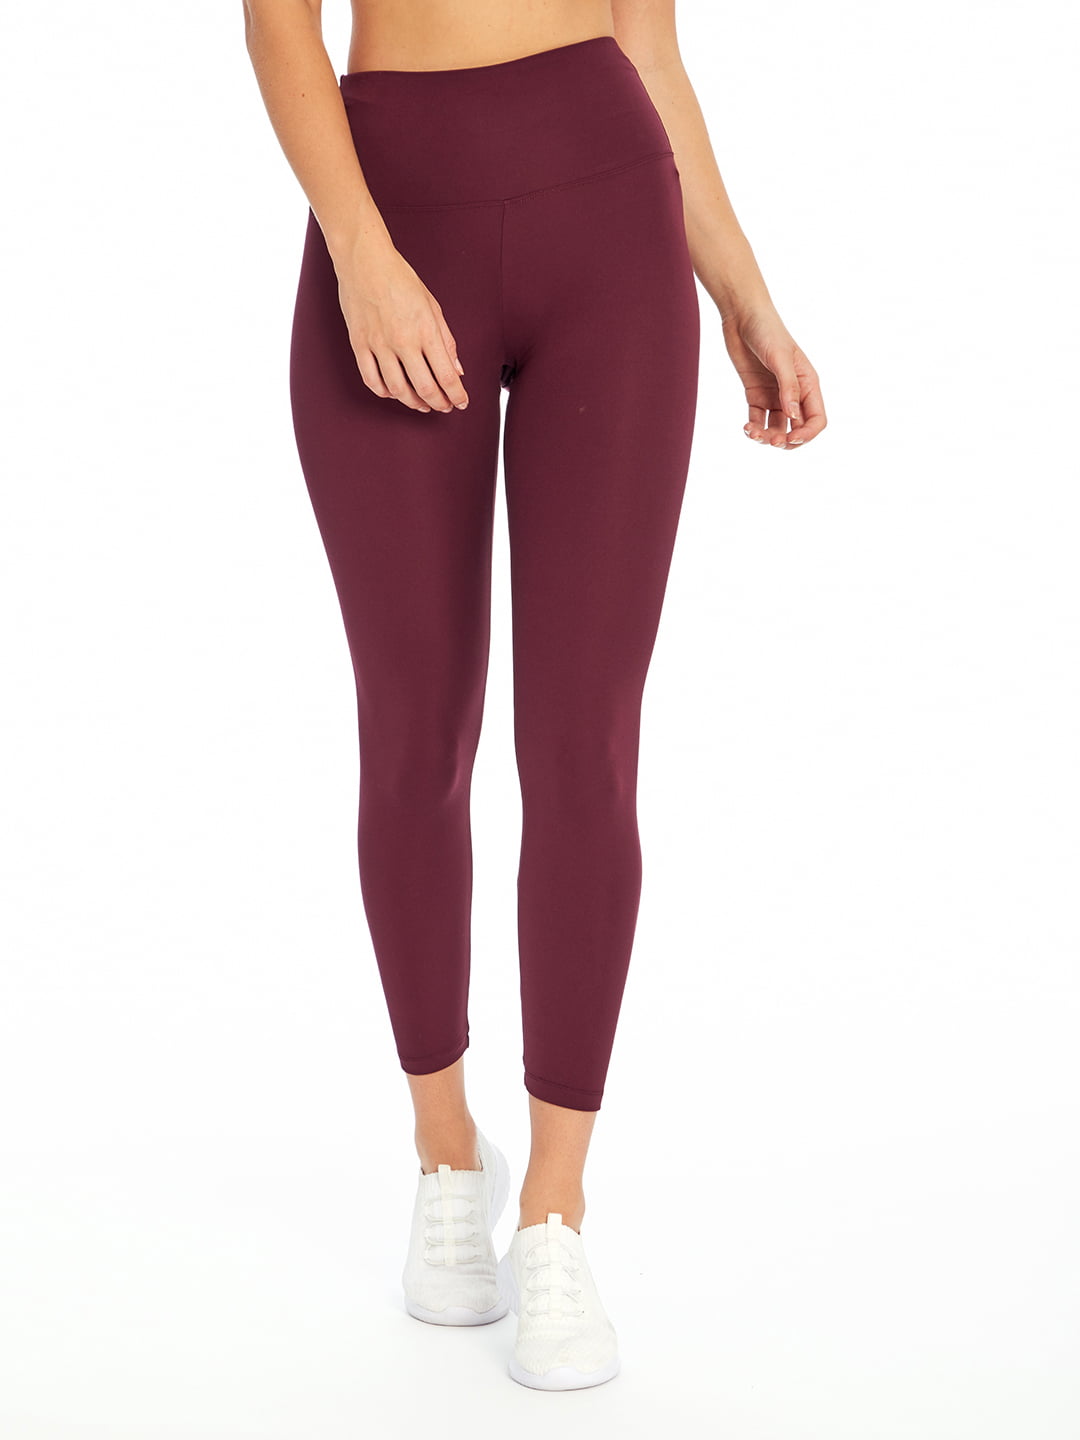 Bally Total Fitness Women's Active Barely Flare Yoga Pant - Walmart.com